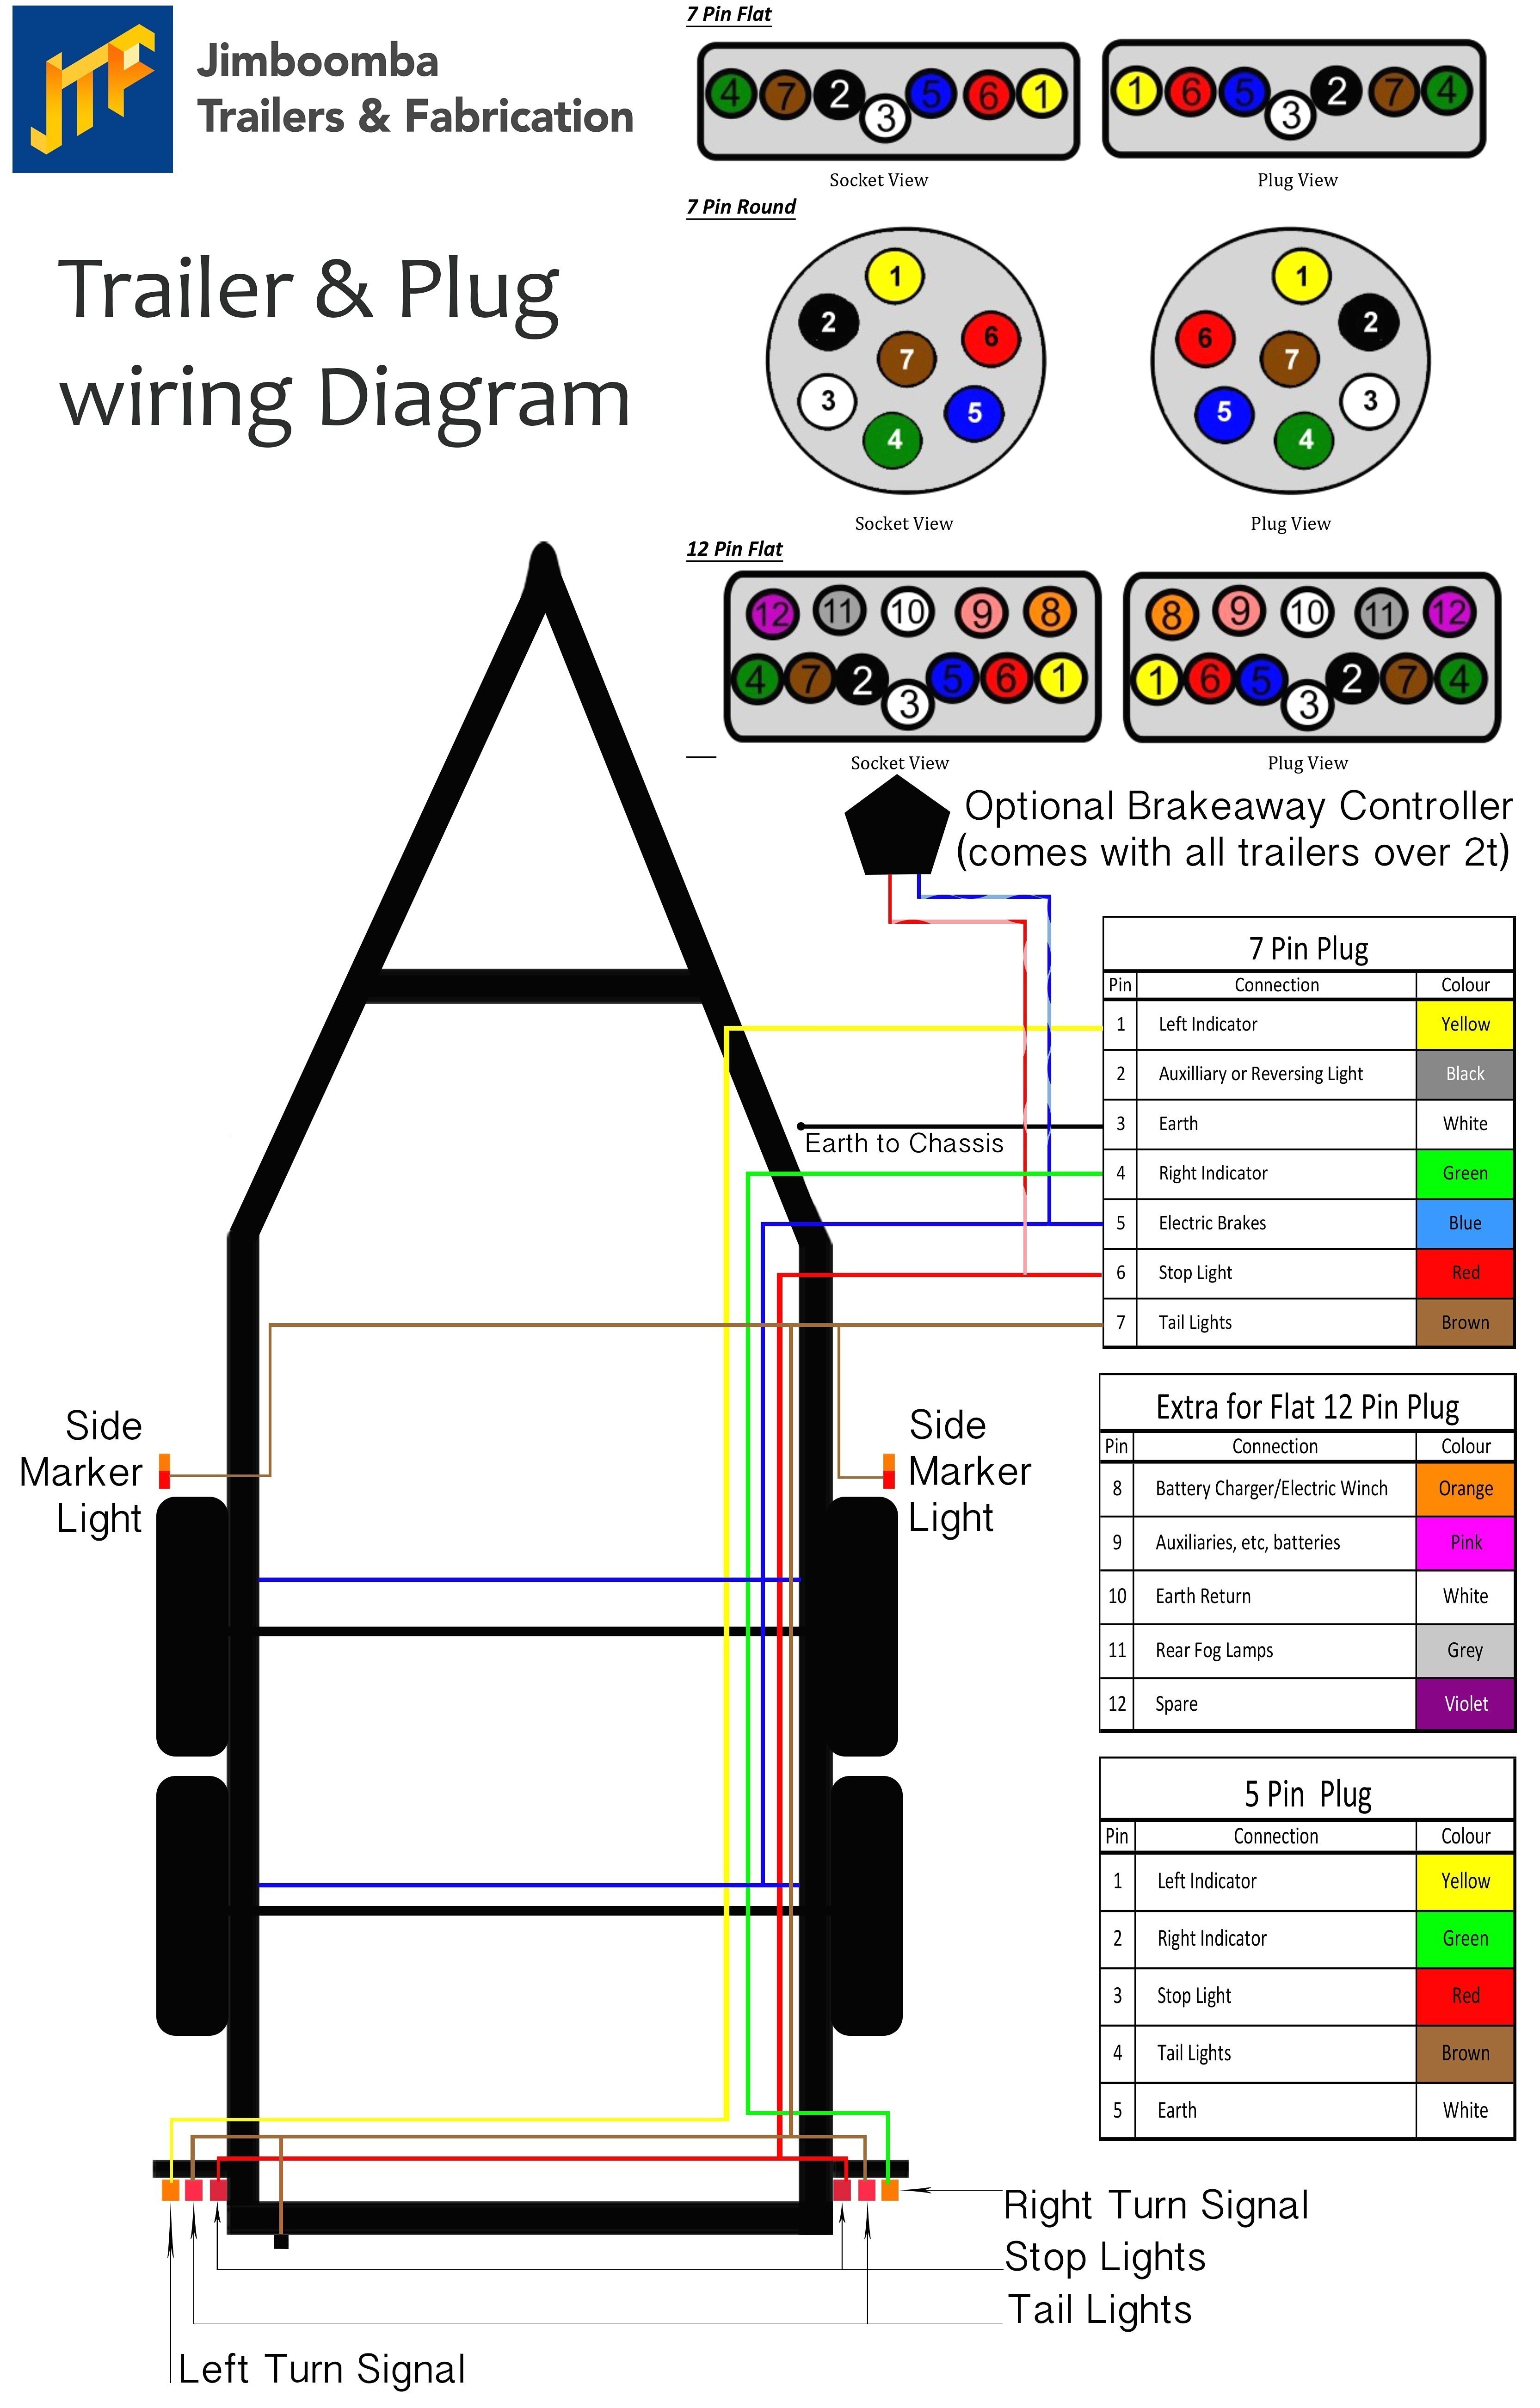 Wiring Diagram for Trailer Hitch Plug New 7 Blade Wiring Diagram Luxury Wiring Diagram Od Rv